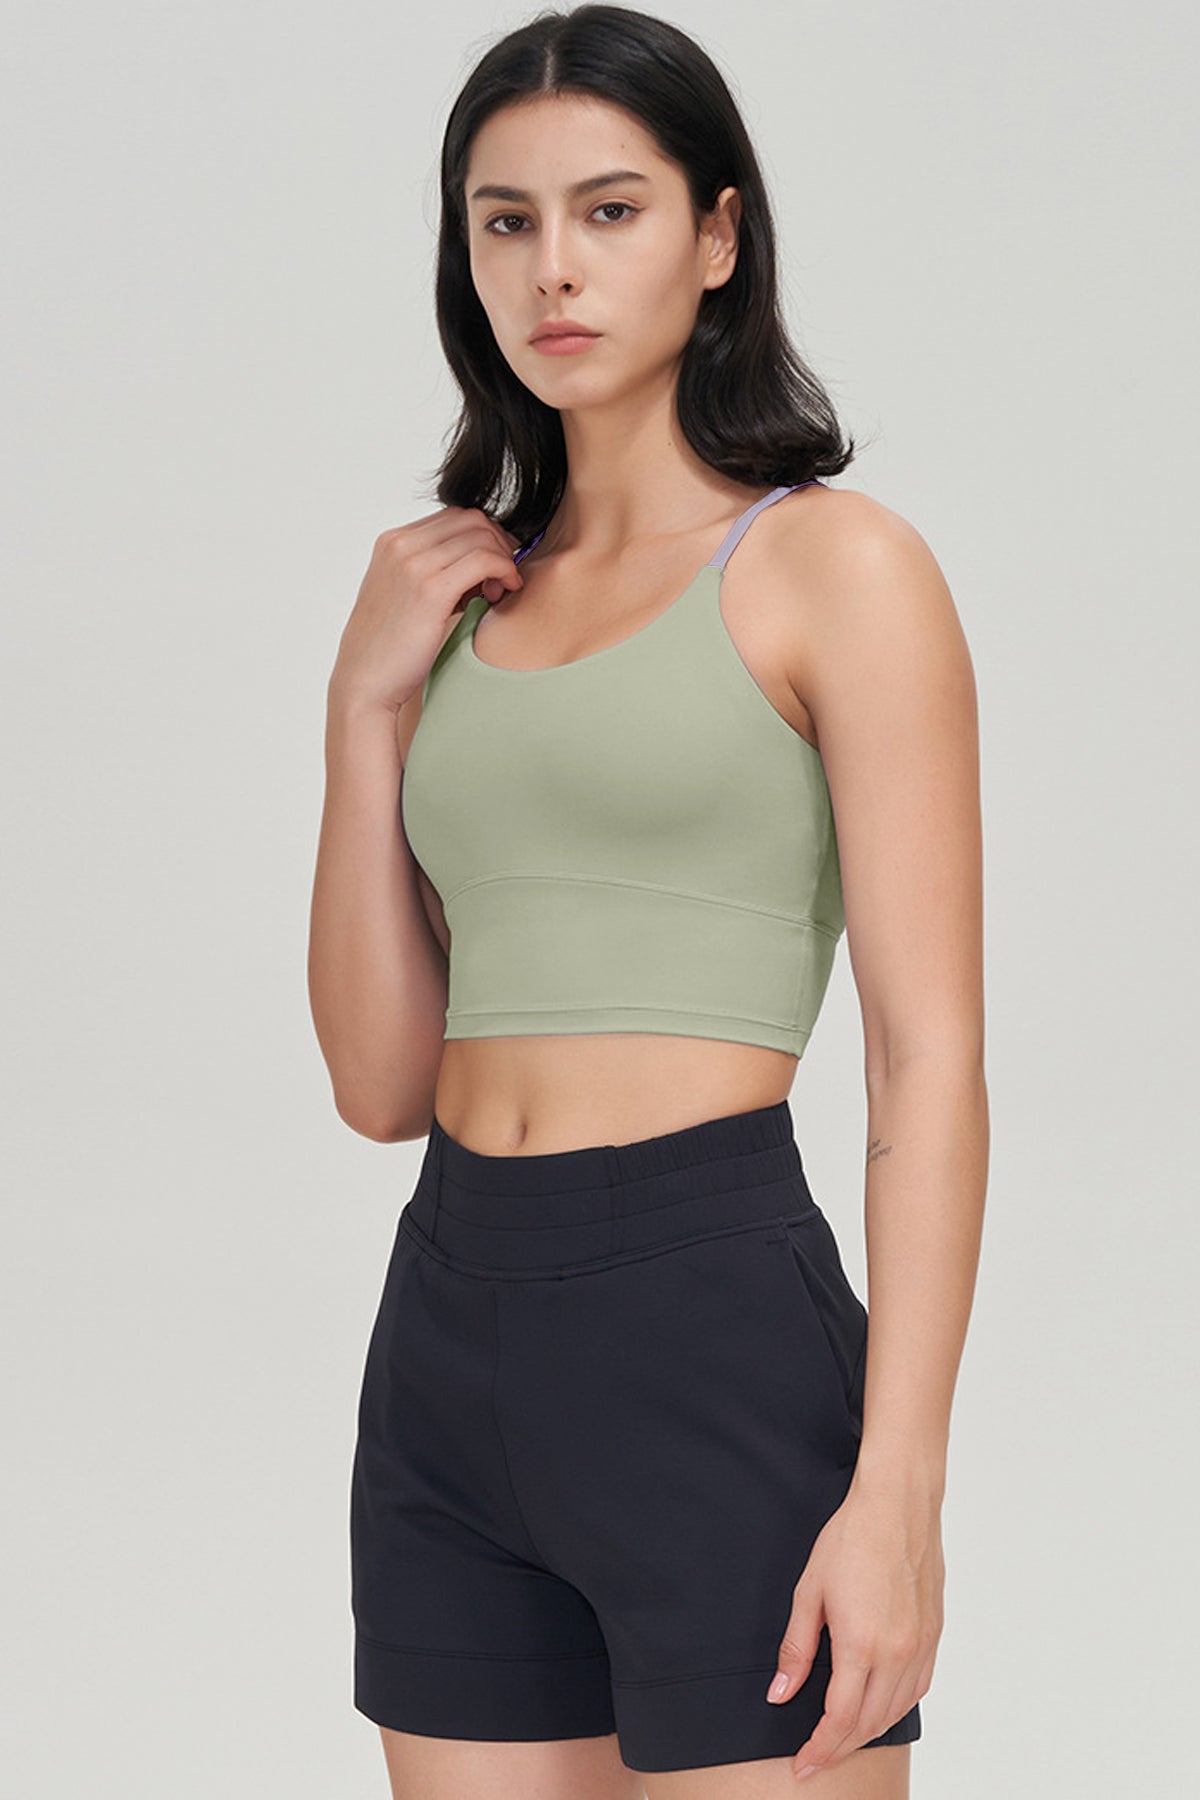 Bench/ lifestyle + clothing - Stay active with this Sports Bra  >>> paired with a Low Rise Boyshorts  >>> by BENCH/ Body Ladies available at the BENCH/  Online Store. #benchtm #benchbodyladies #sportswear #